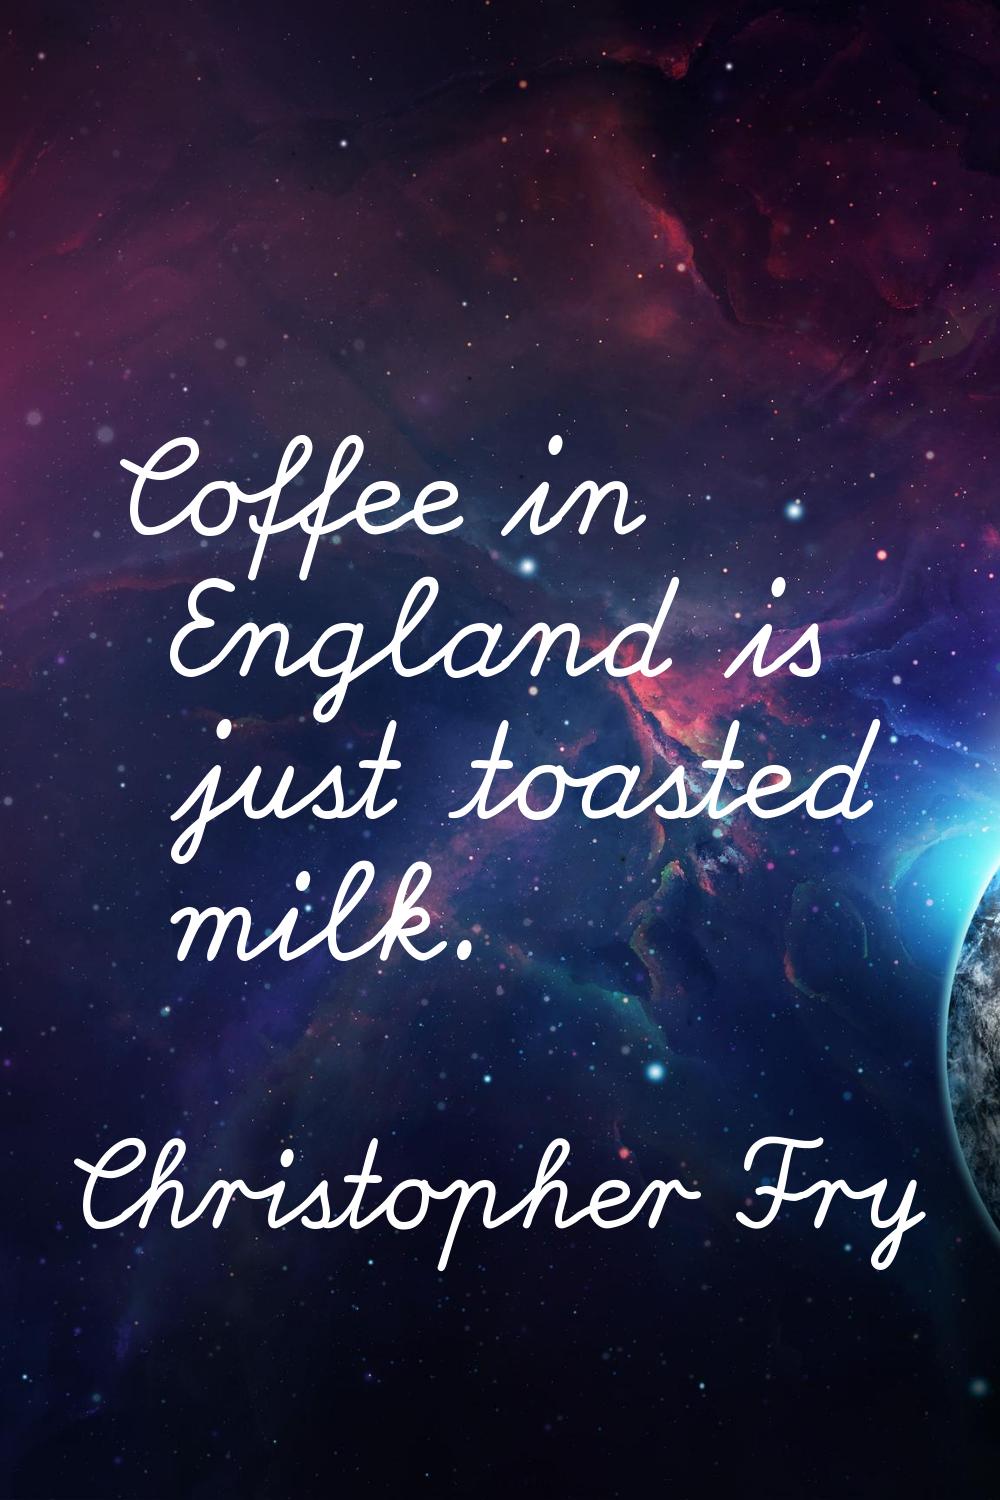 Coffee in England is just toasted milk.